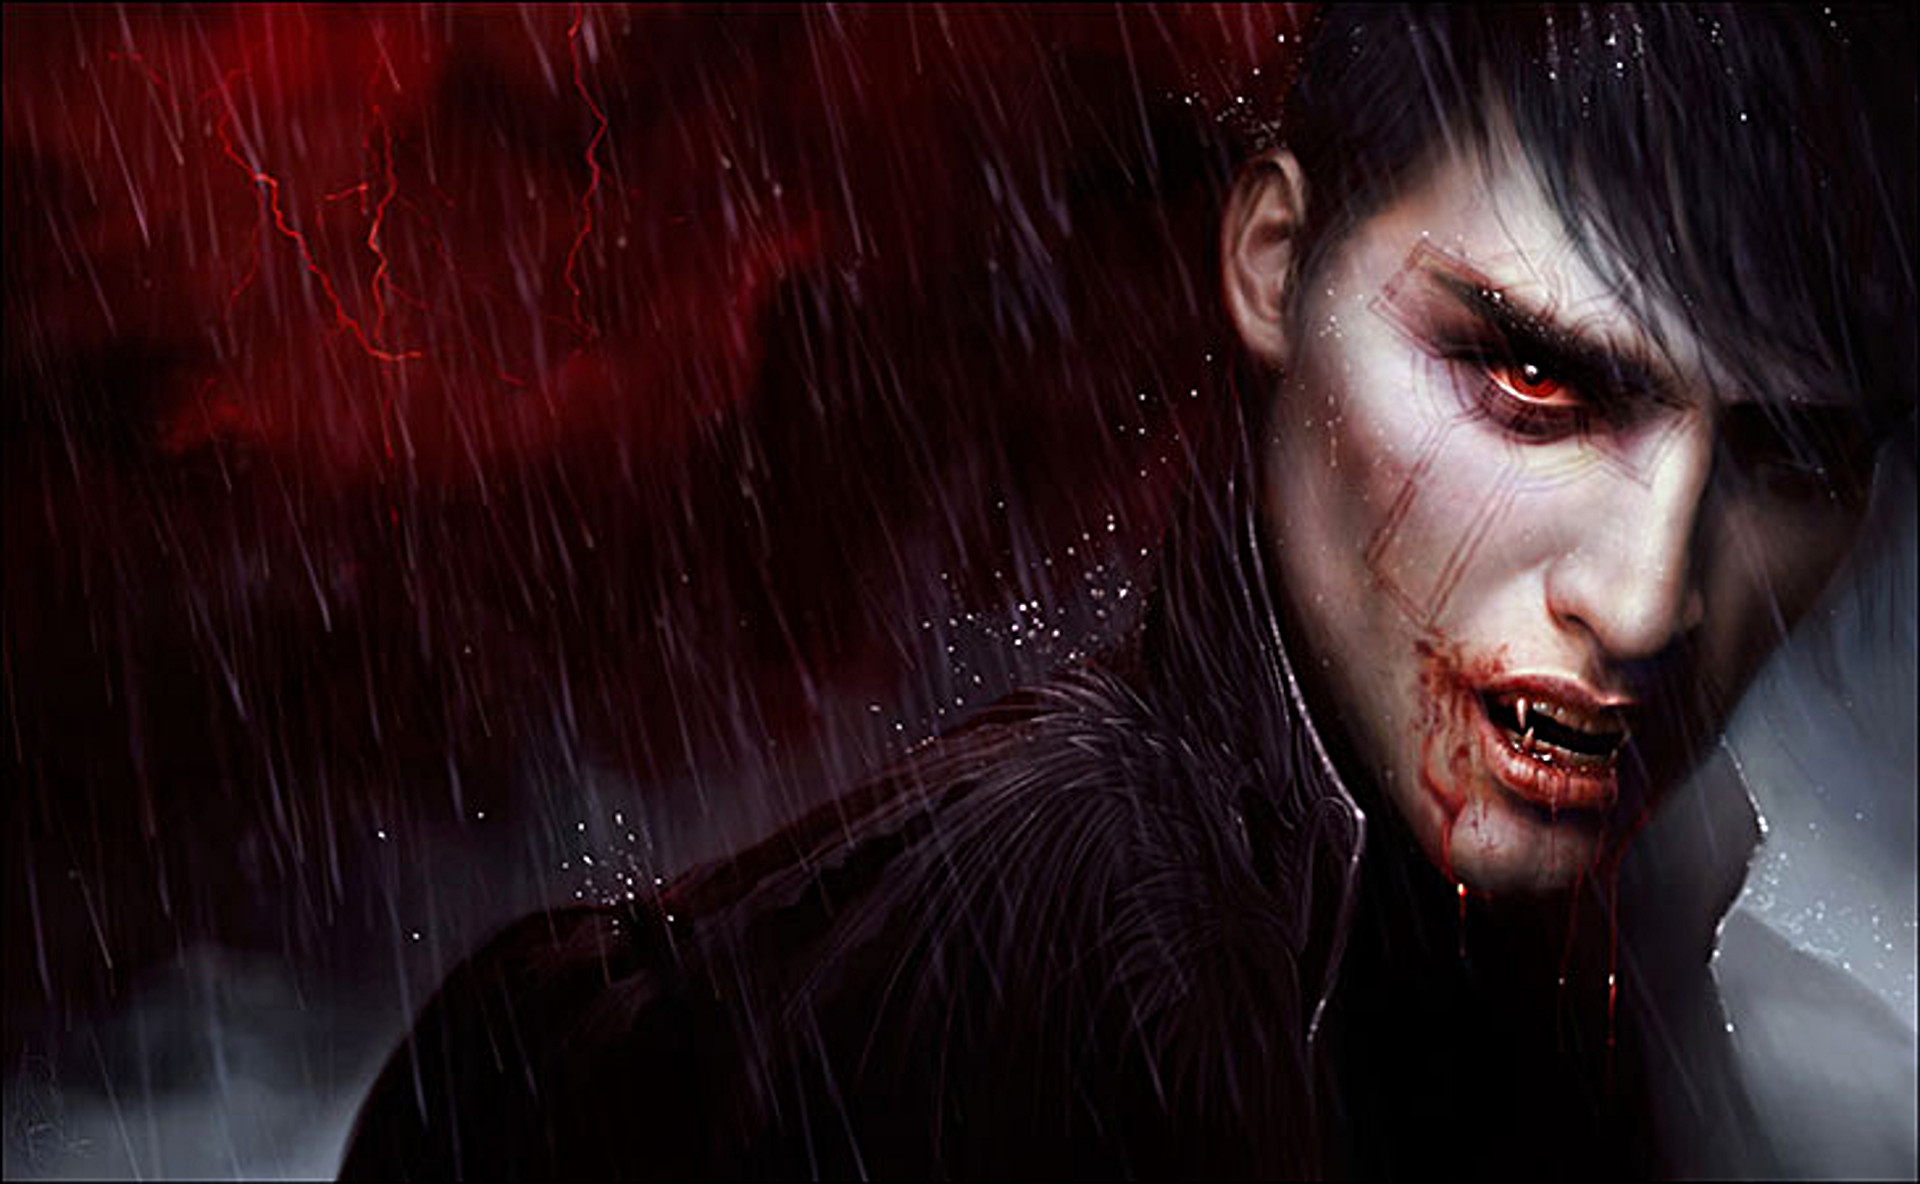 Vampire New Awesome High Quality Wallpaper All HD